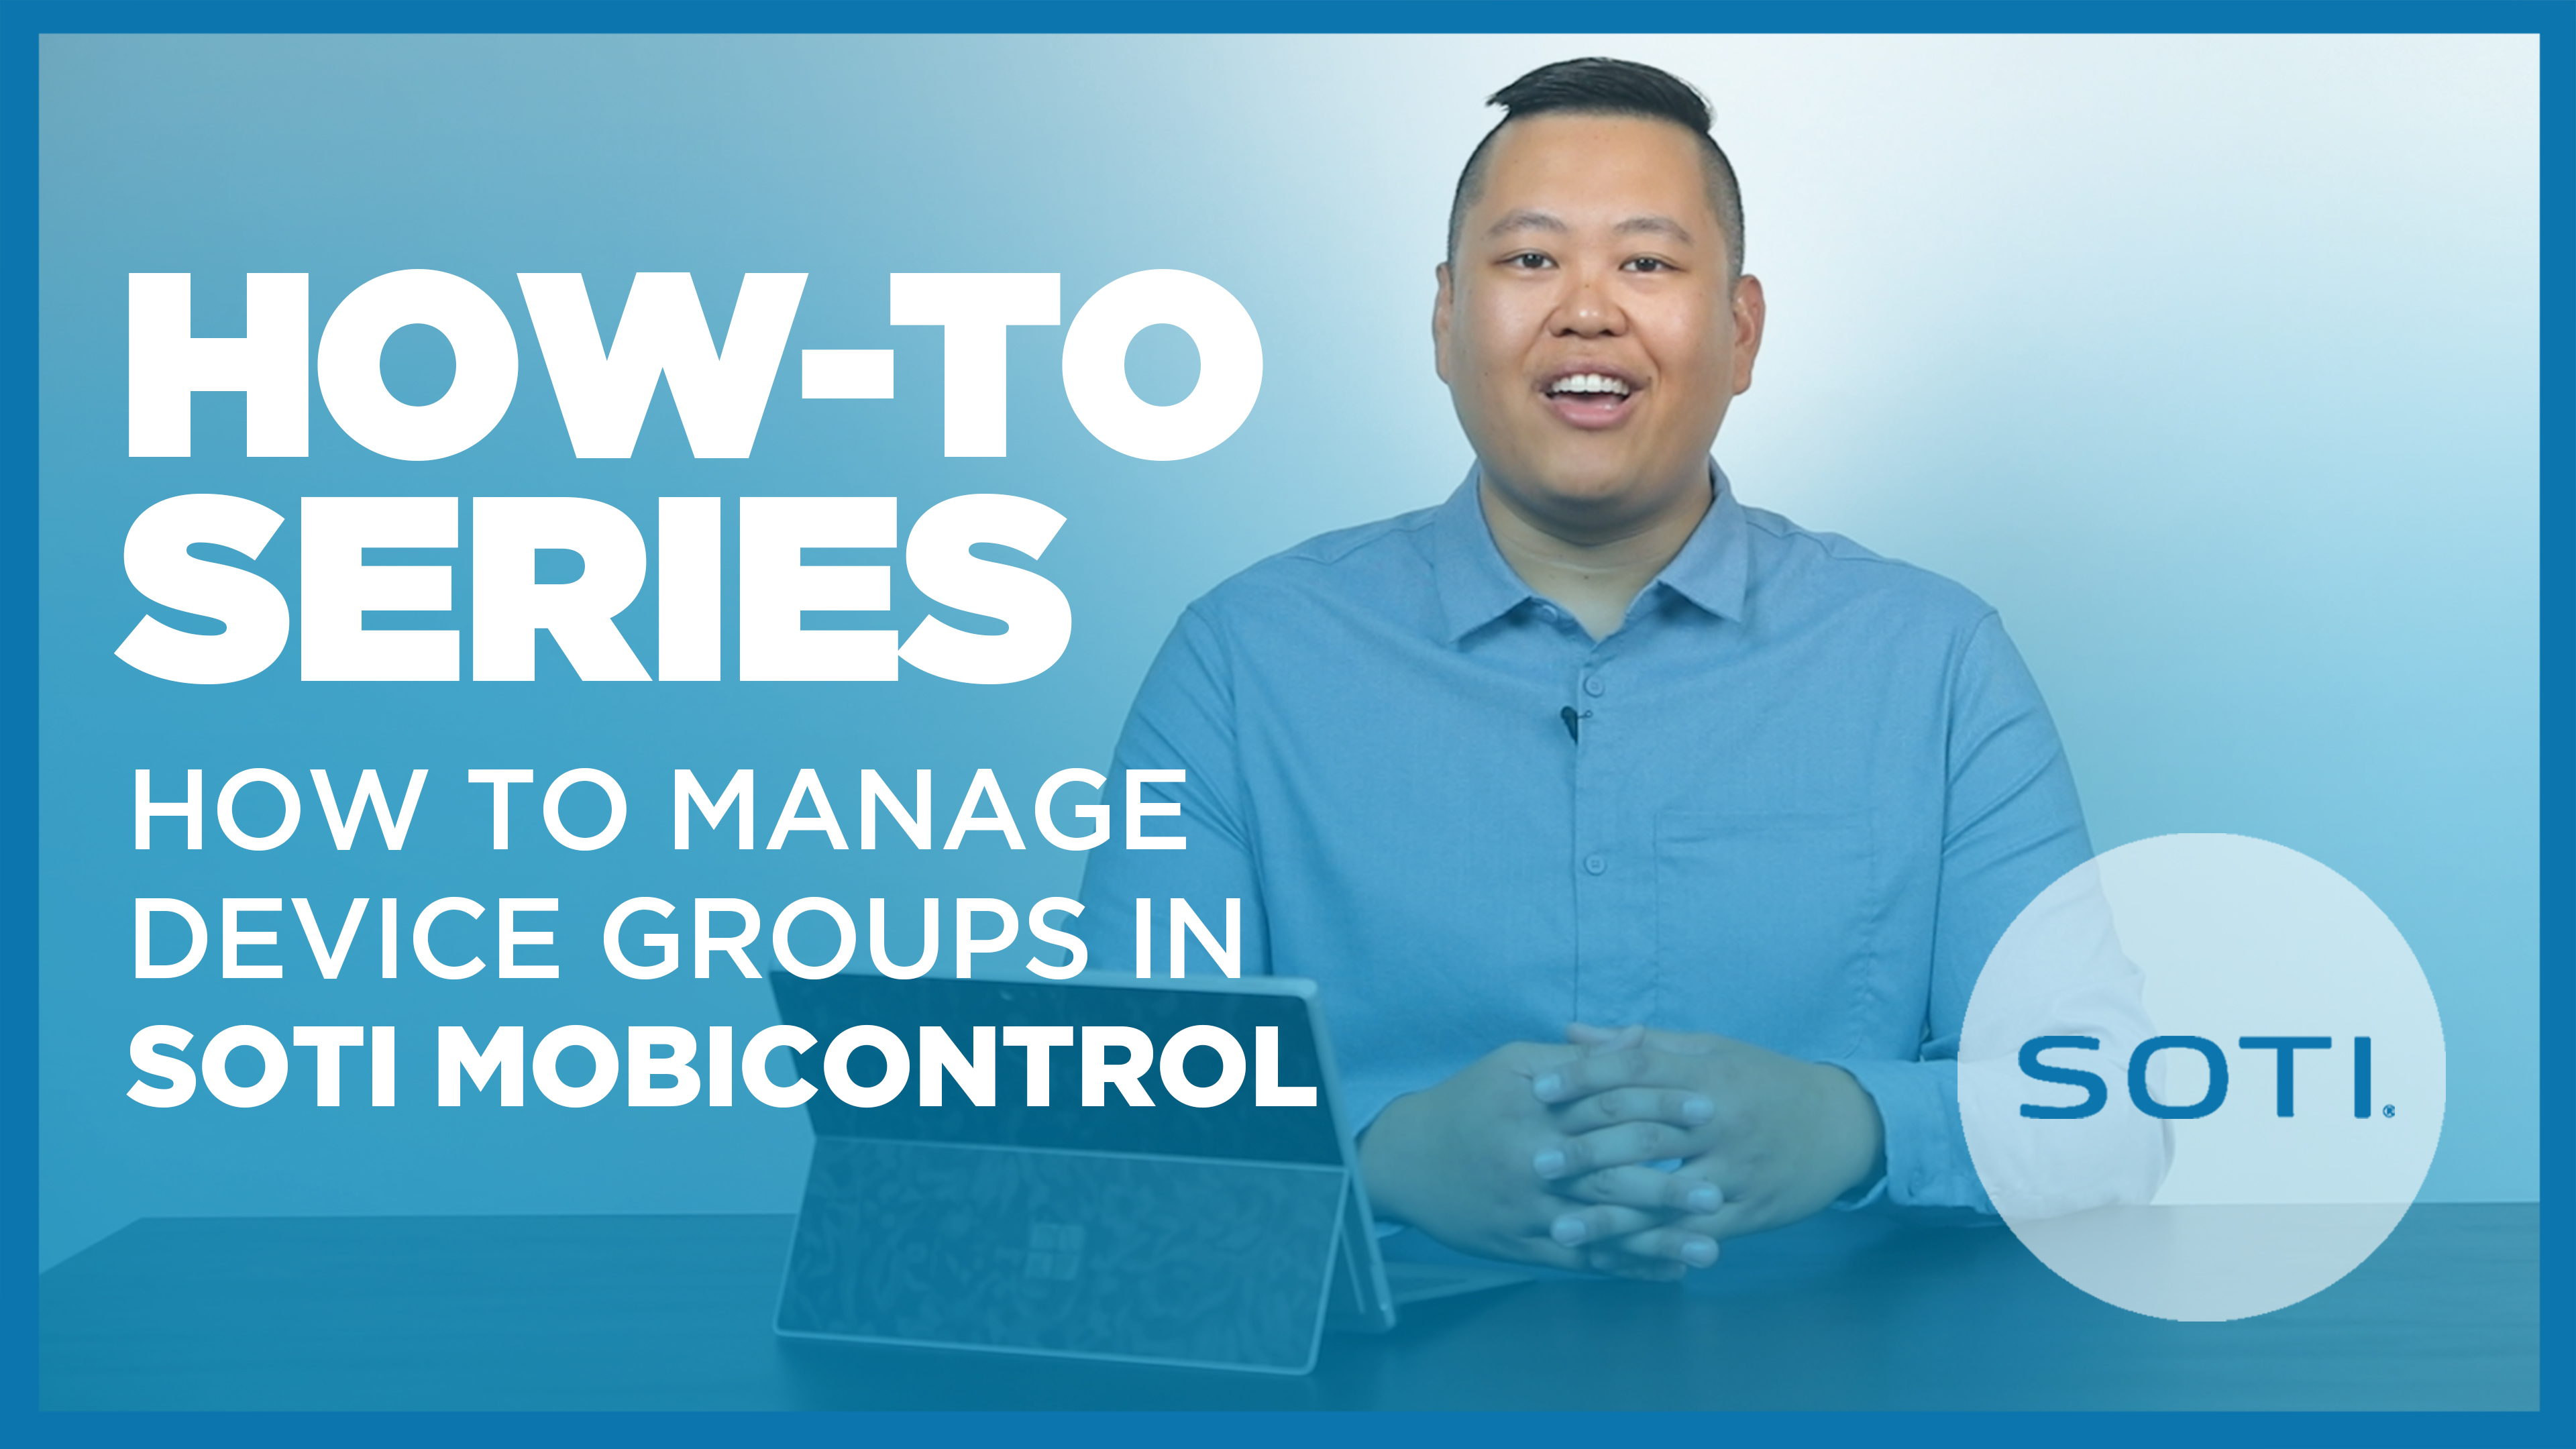 How-To: Manage Device Groups in SOTI MobiControl